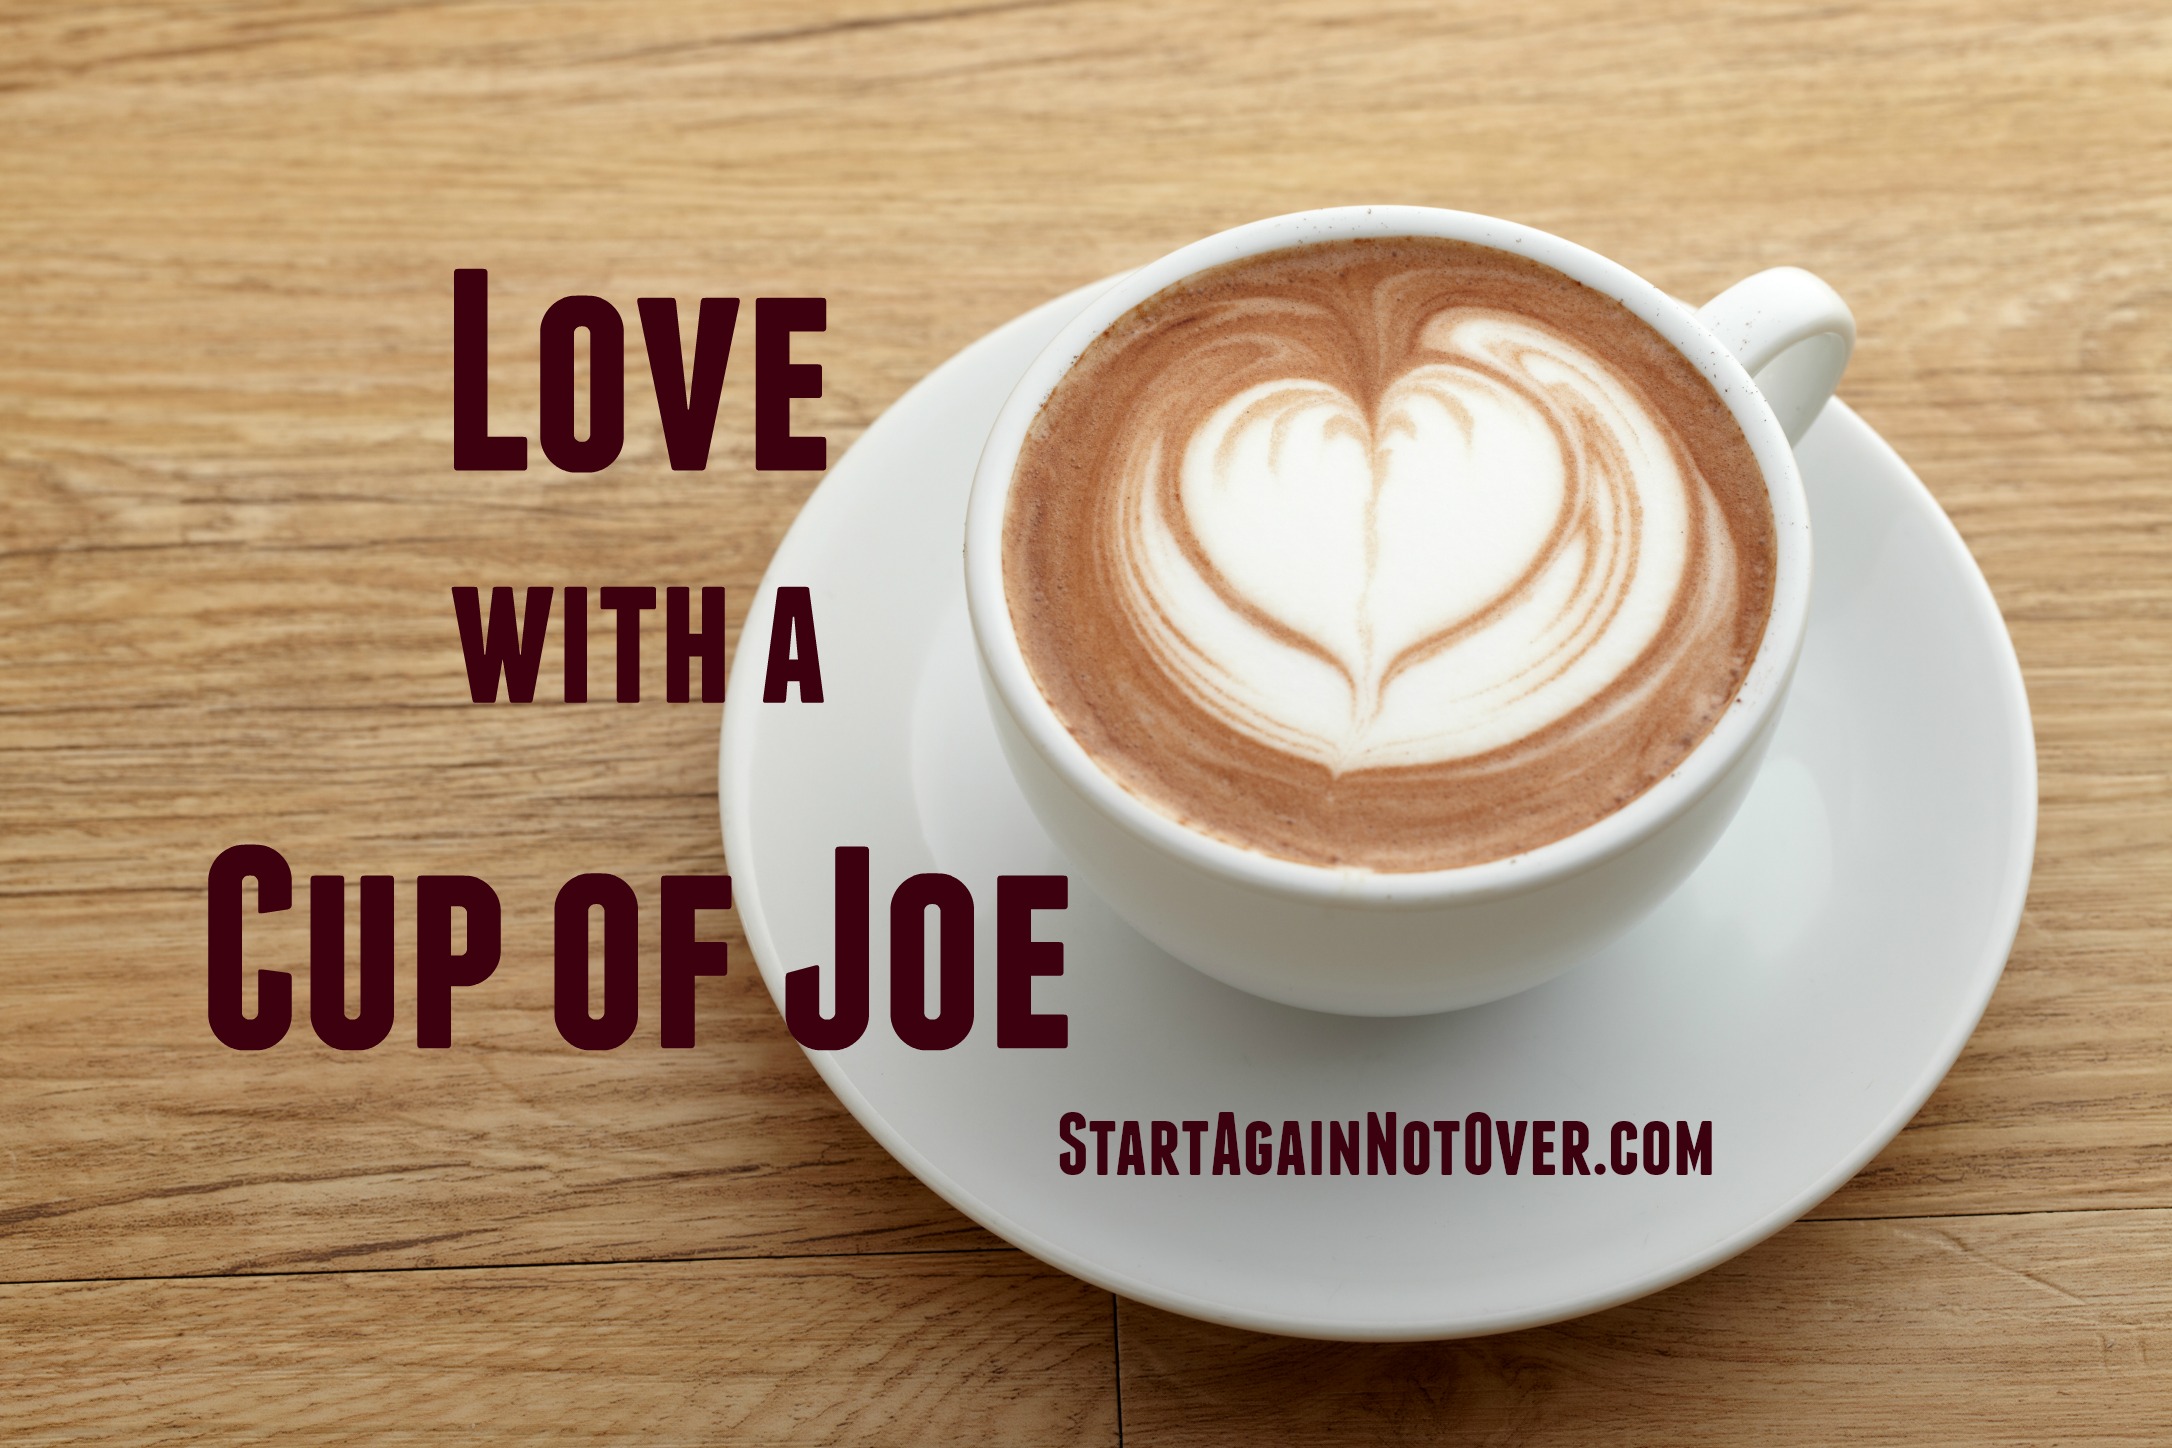 Love with a Cup of Joe